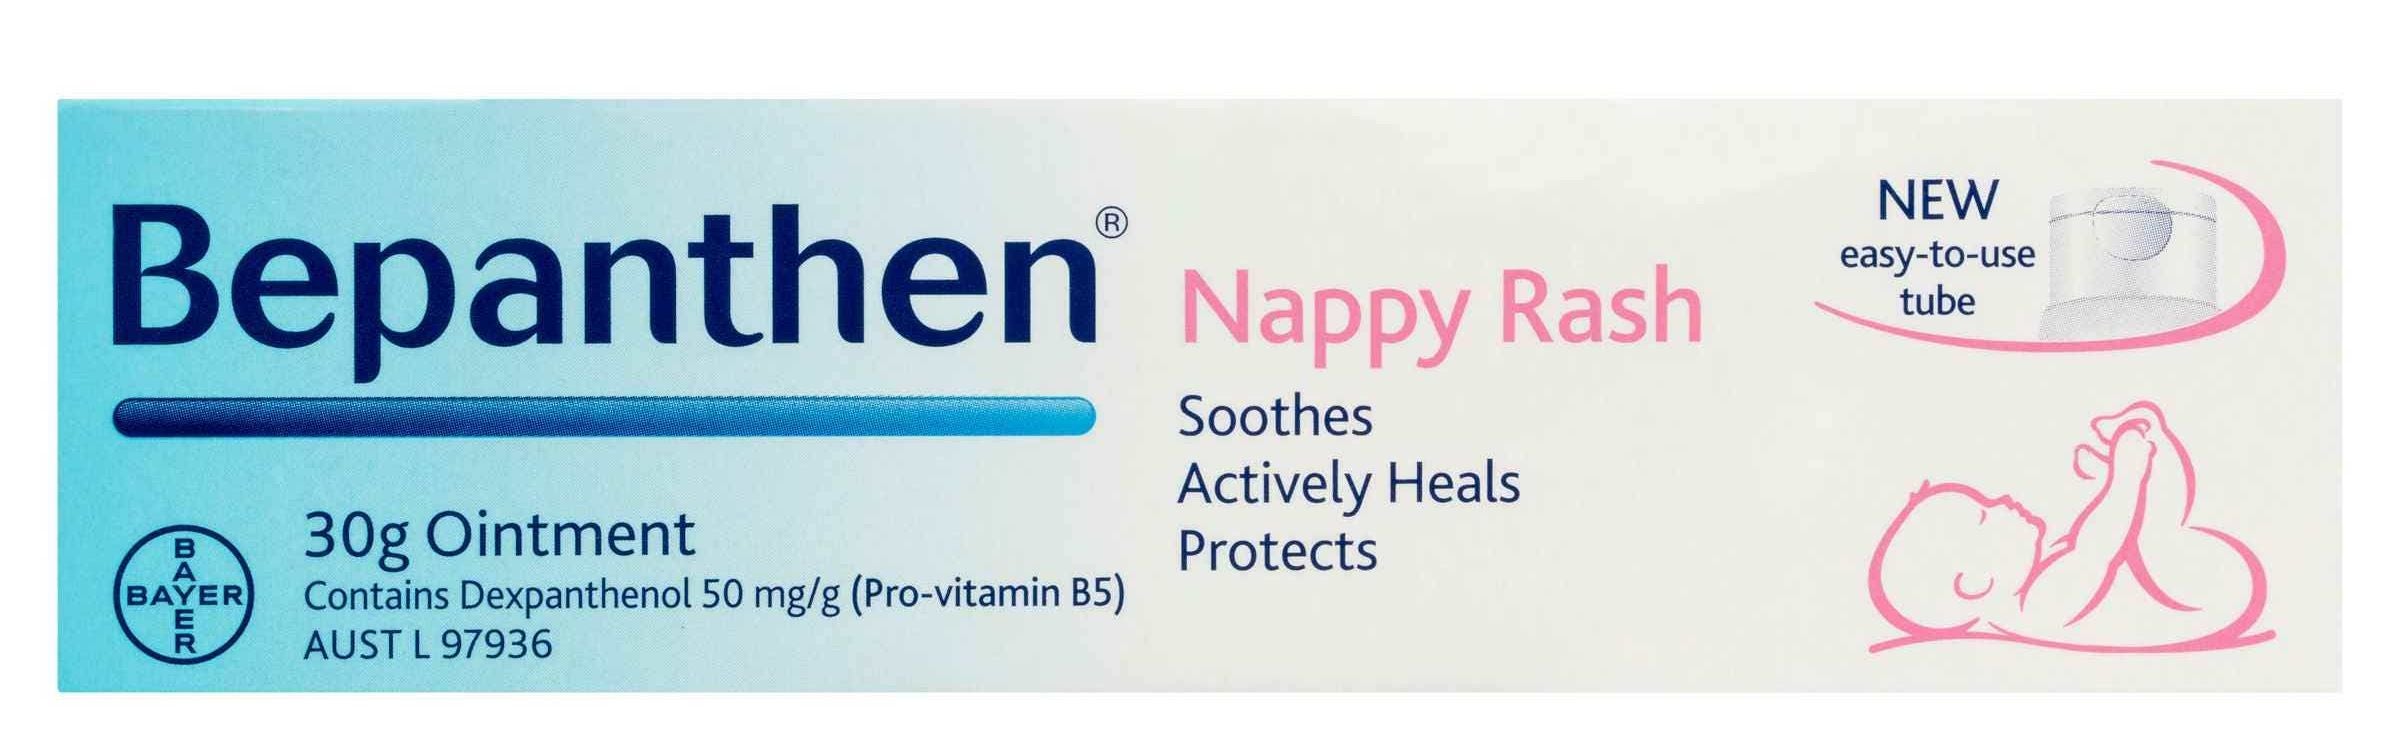 Bepanthen nappy cream review